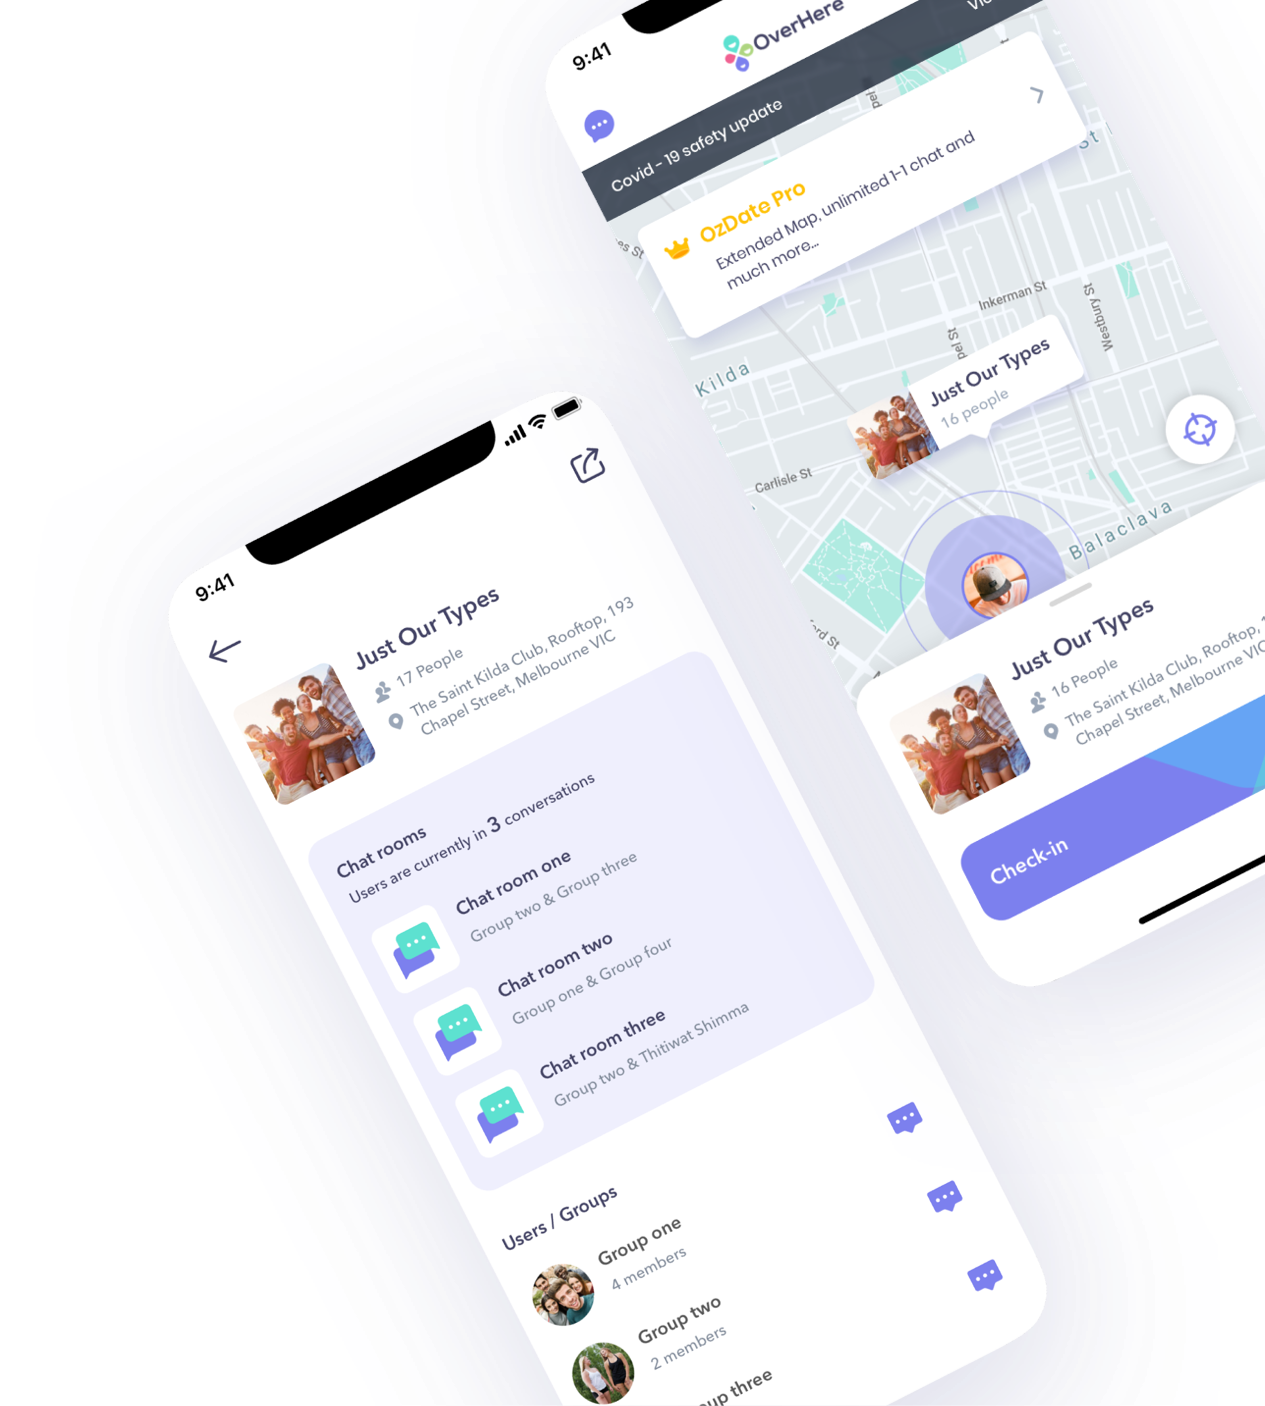 Over Here App features to help users connect socially